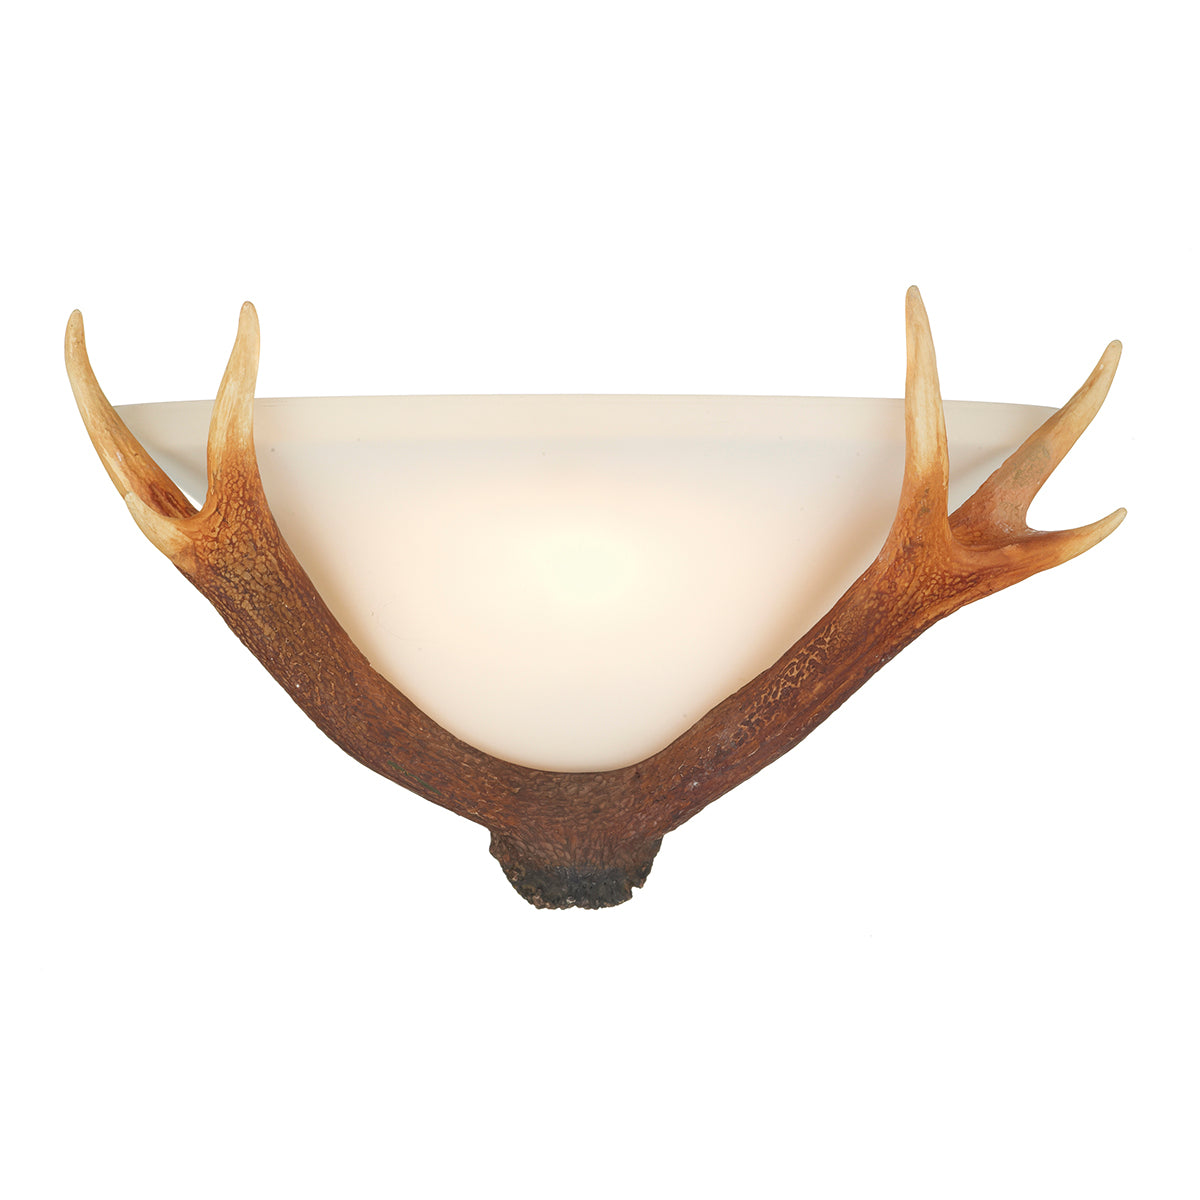 David Hunt Lighting Antler Wall Washer with glass shade ANT07